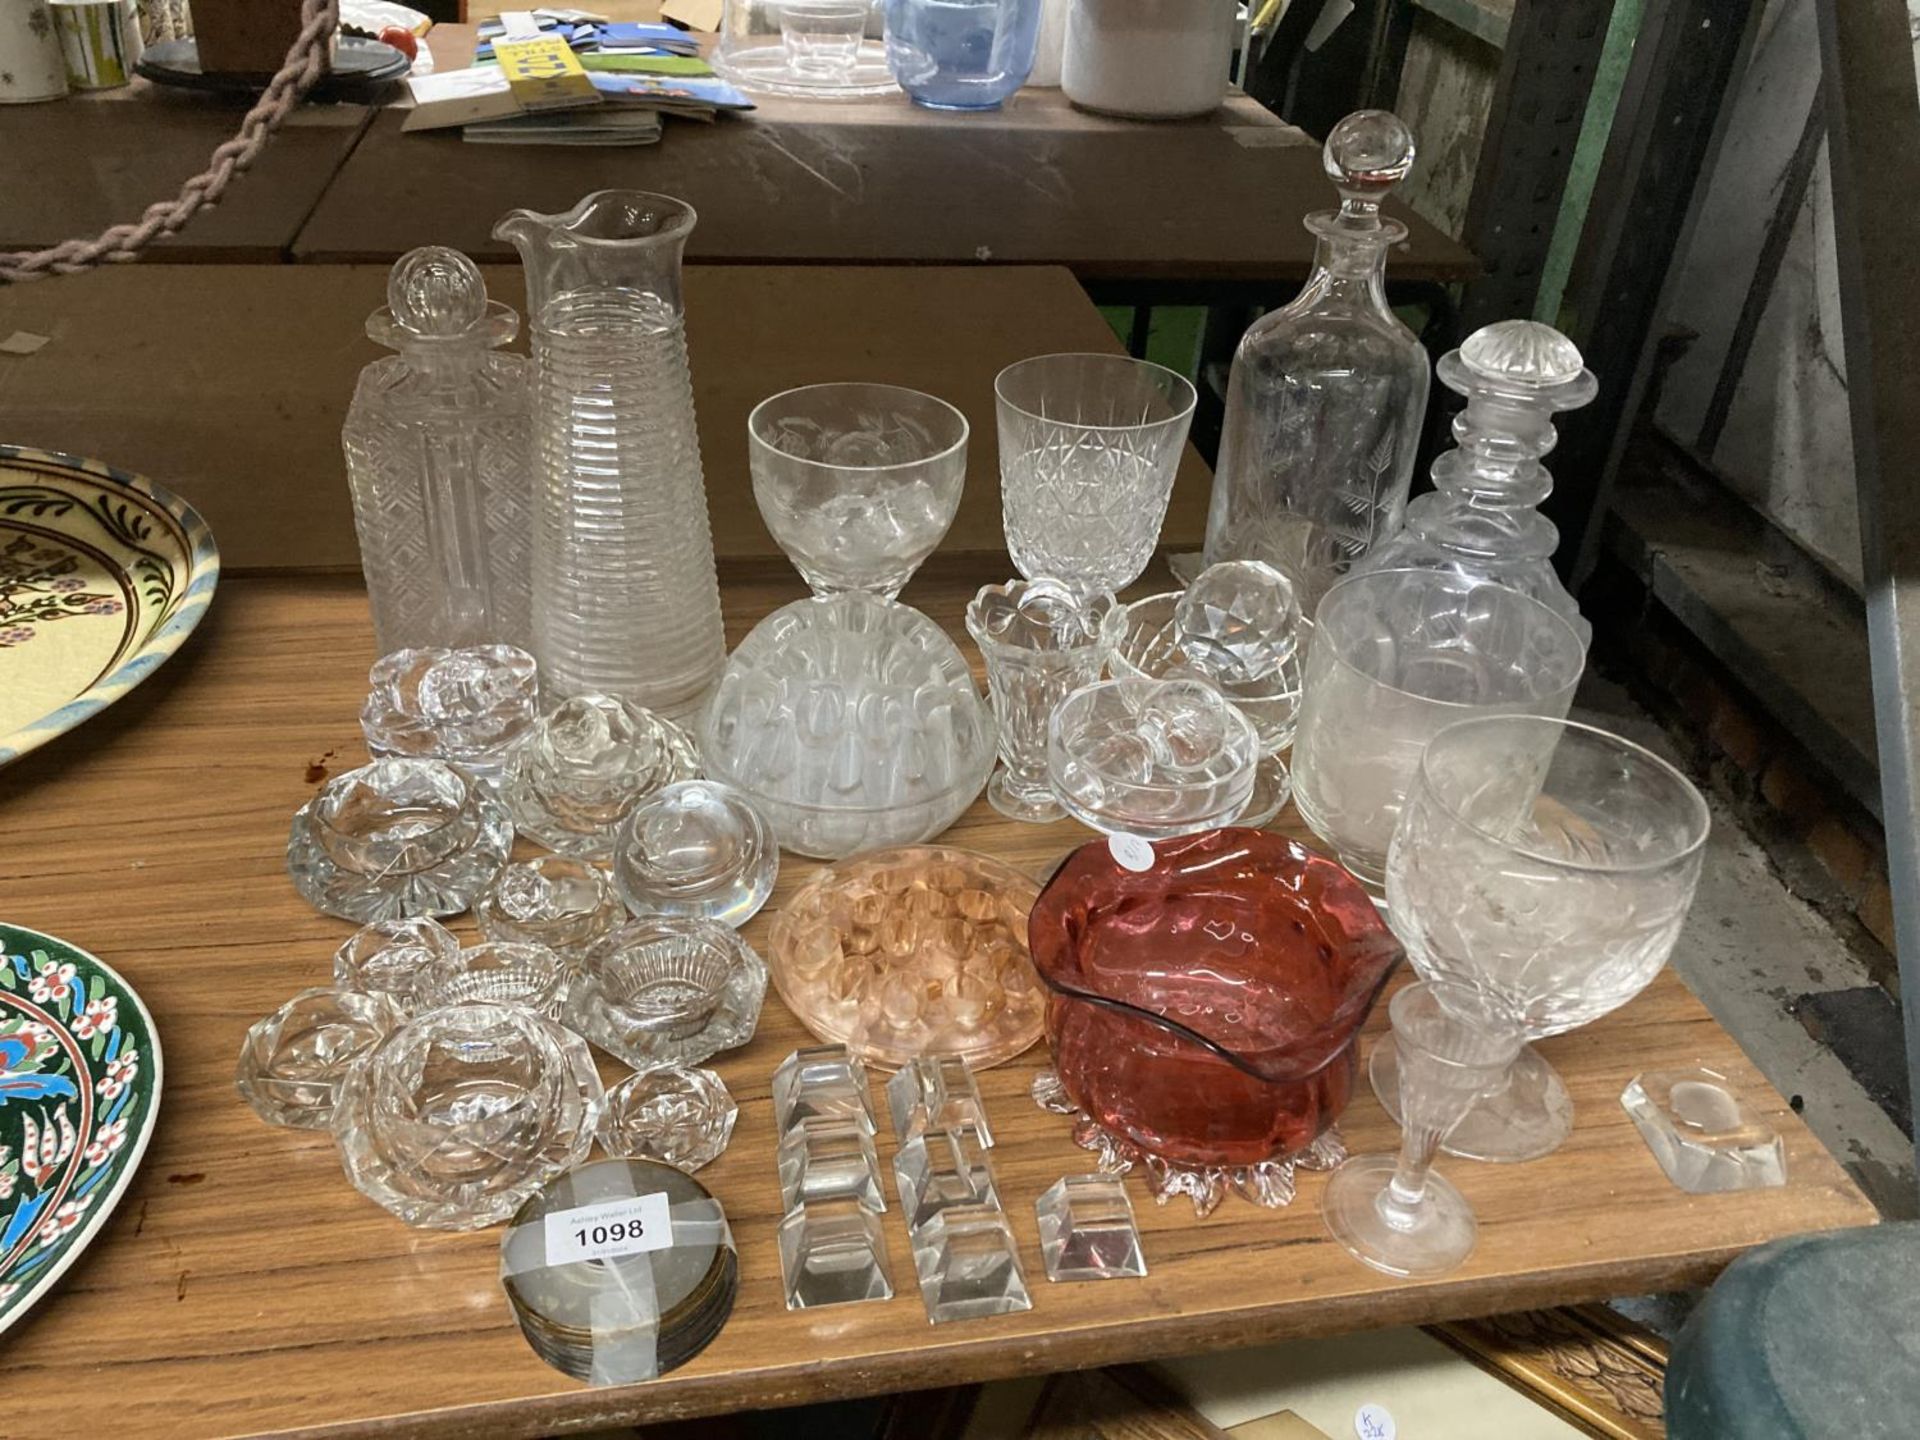 A LARGE QUANTITY OF GLASSWARE TO INCLUDE DECANTERS, NAMECARD HOLDERS, CRANBERRY FOOTED BOWL,